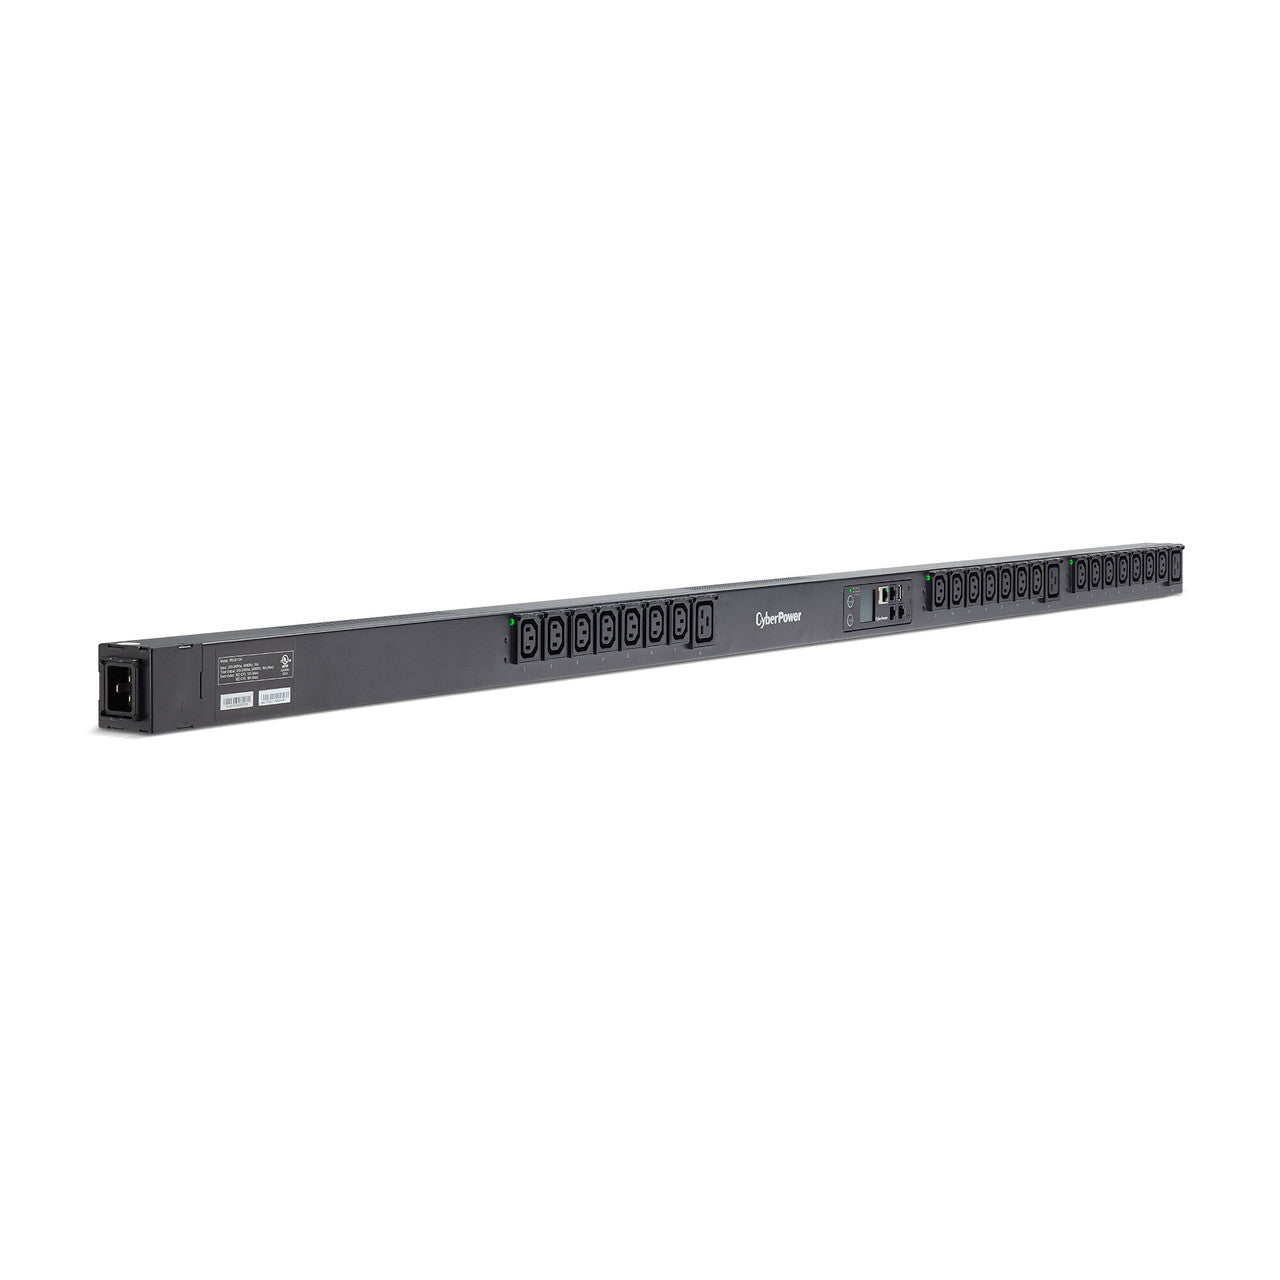 CyberPower PDU81104 Metered-by-Outlet Switched PDU 20A 208V L6-20P Input (21) C13 (3) C19 Output 10ft Cord 0U 3yr Wty